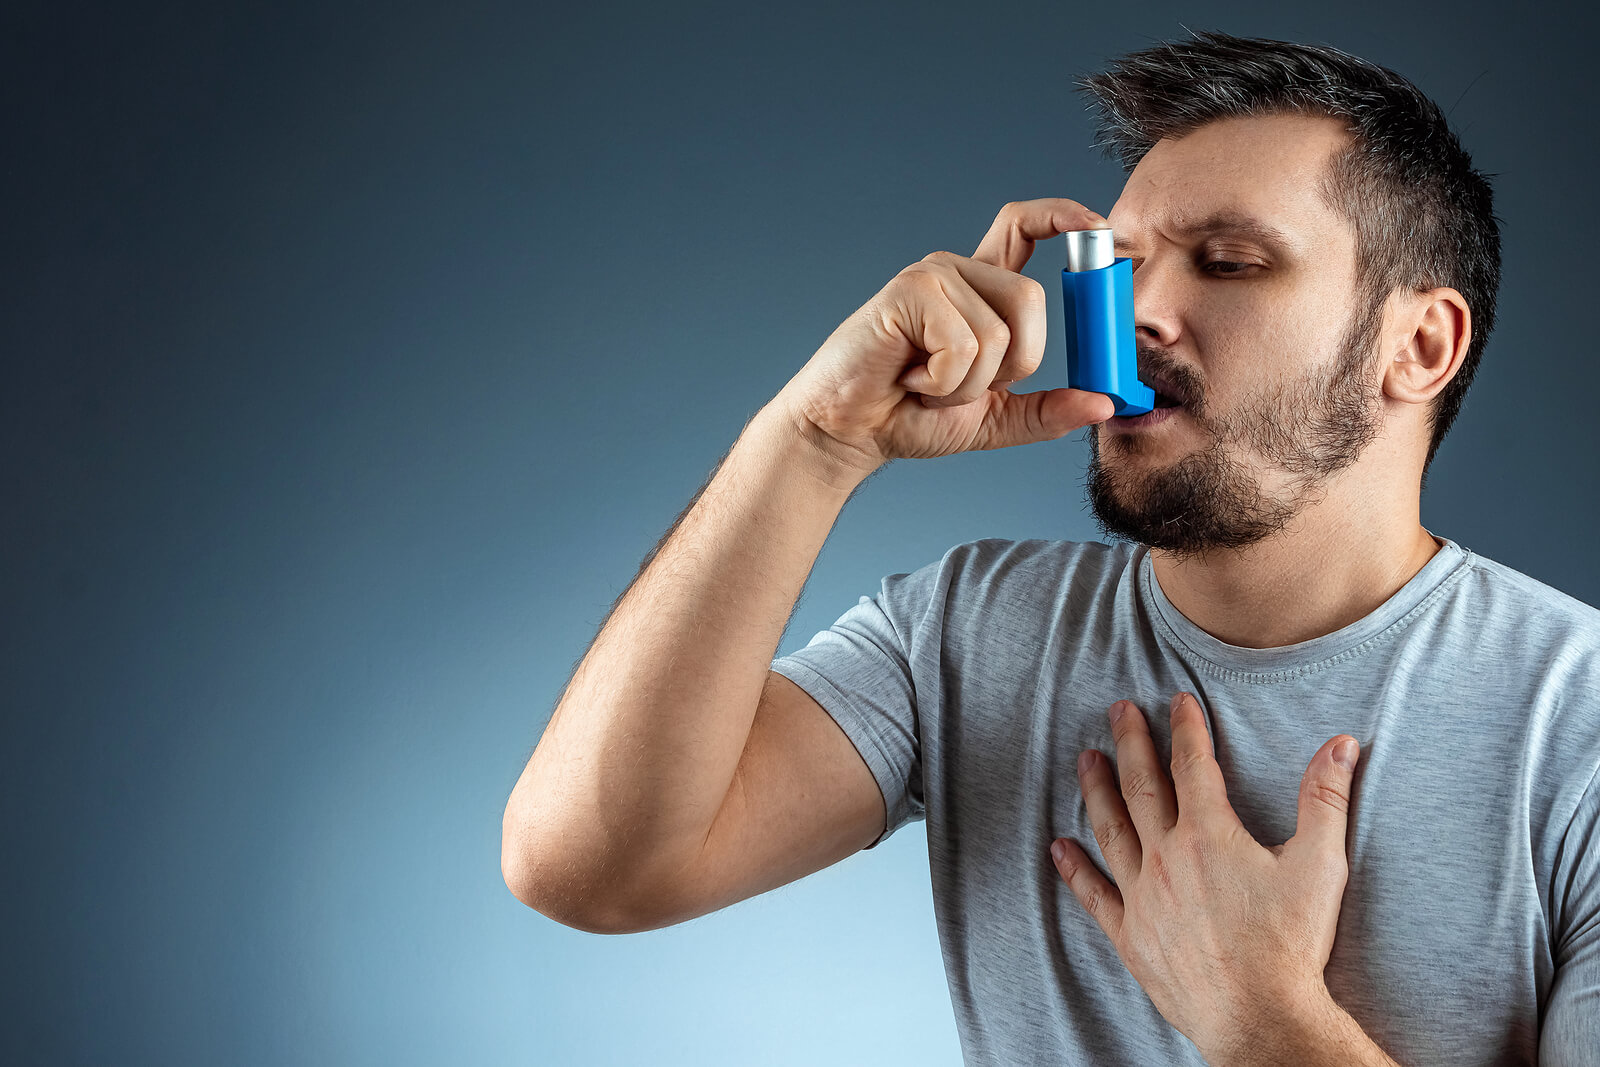 Living with asthma is possible with small precautions